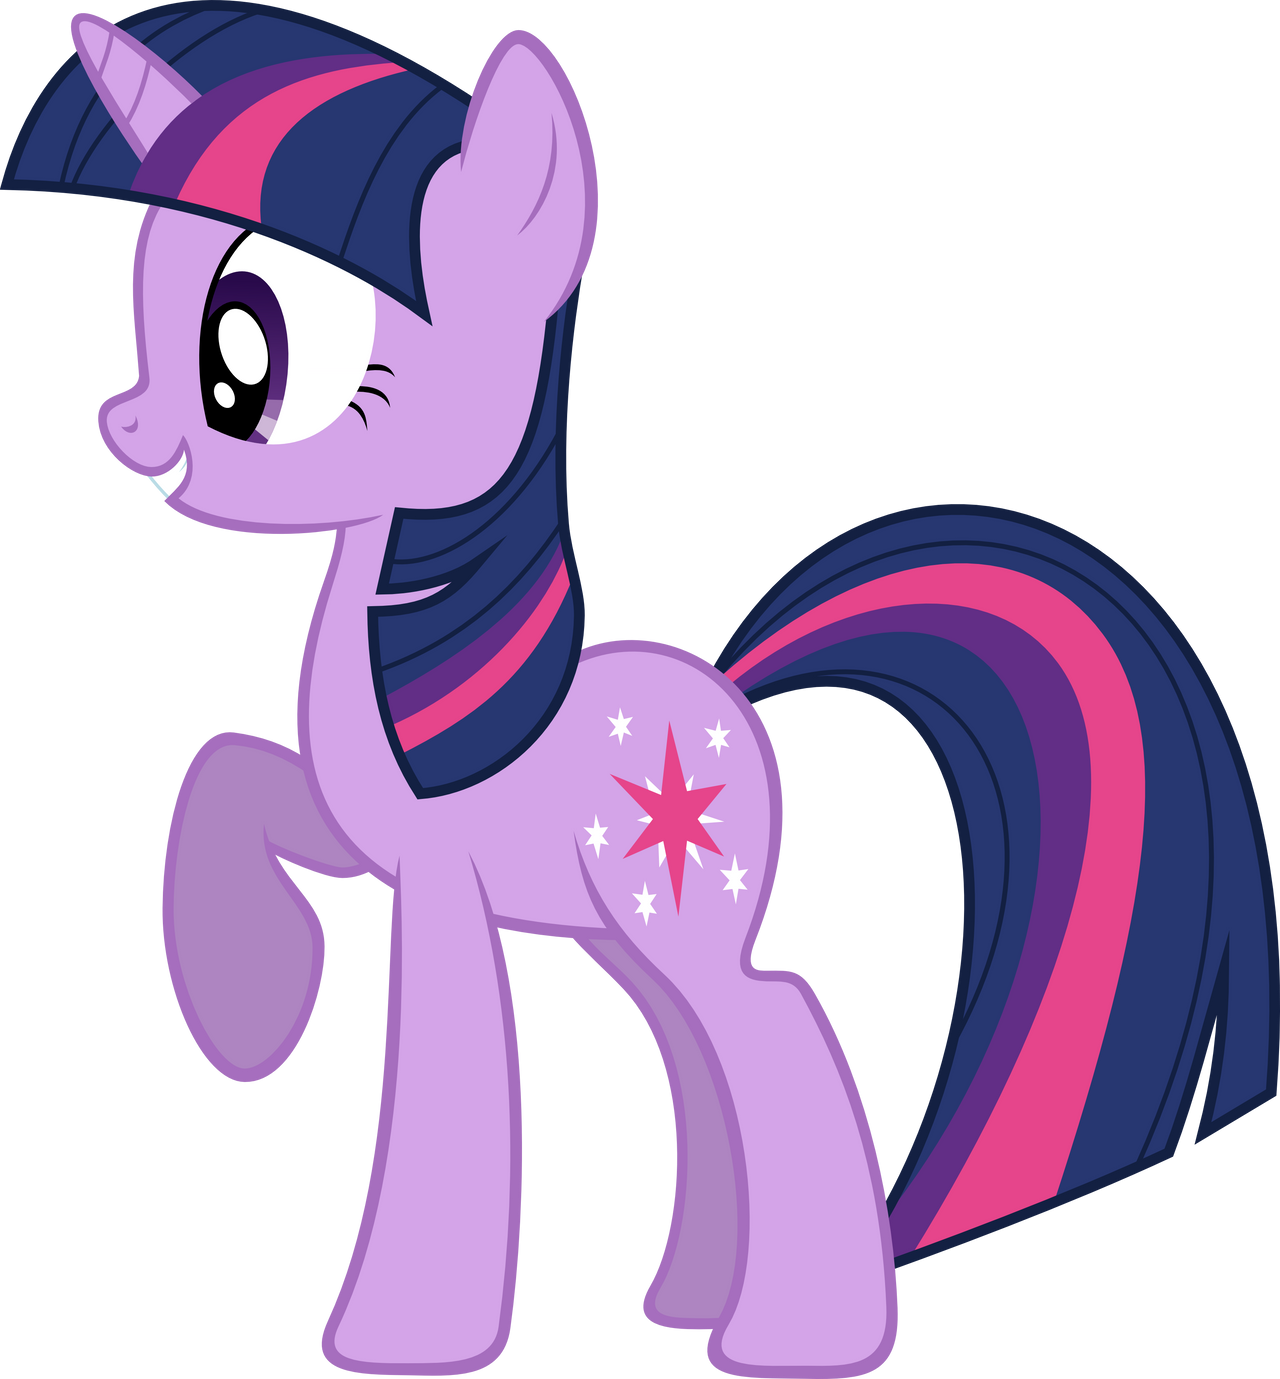 twilight_sparkle_is_ready_for_action_by_baumkuchenpony-d56fumd.png